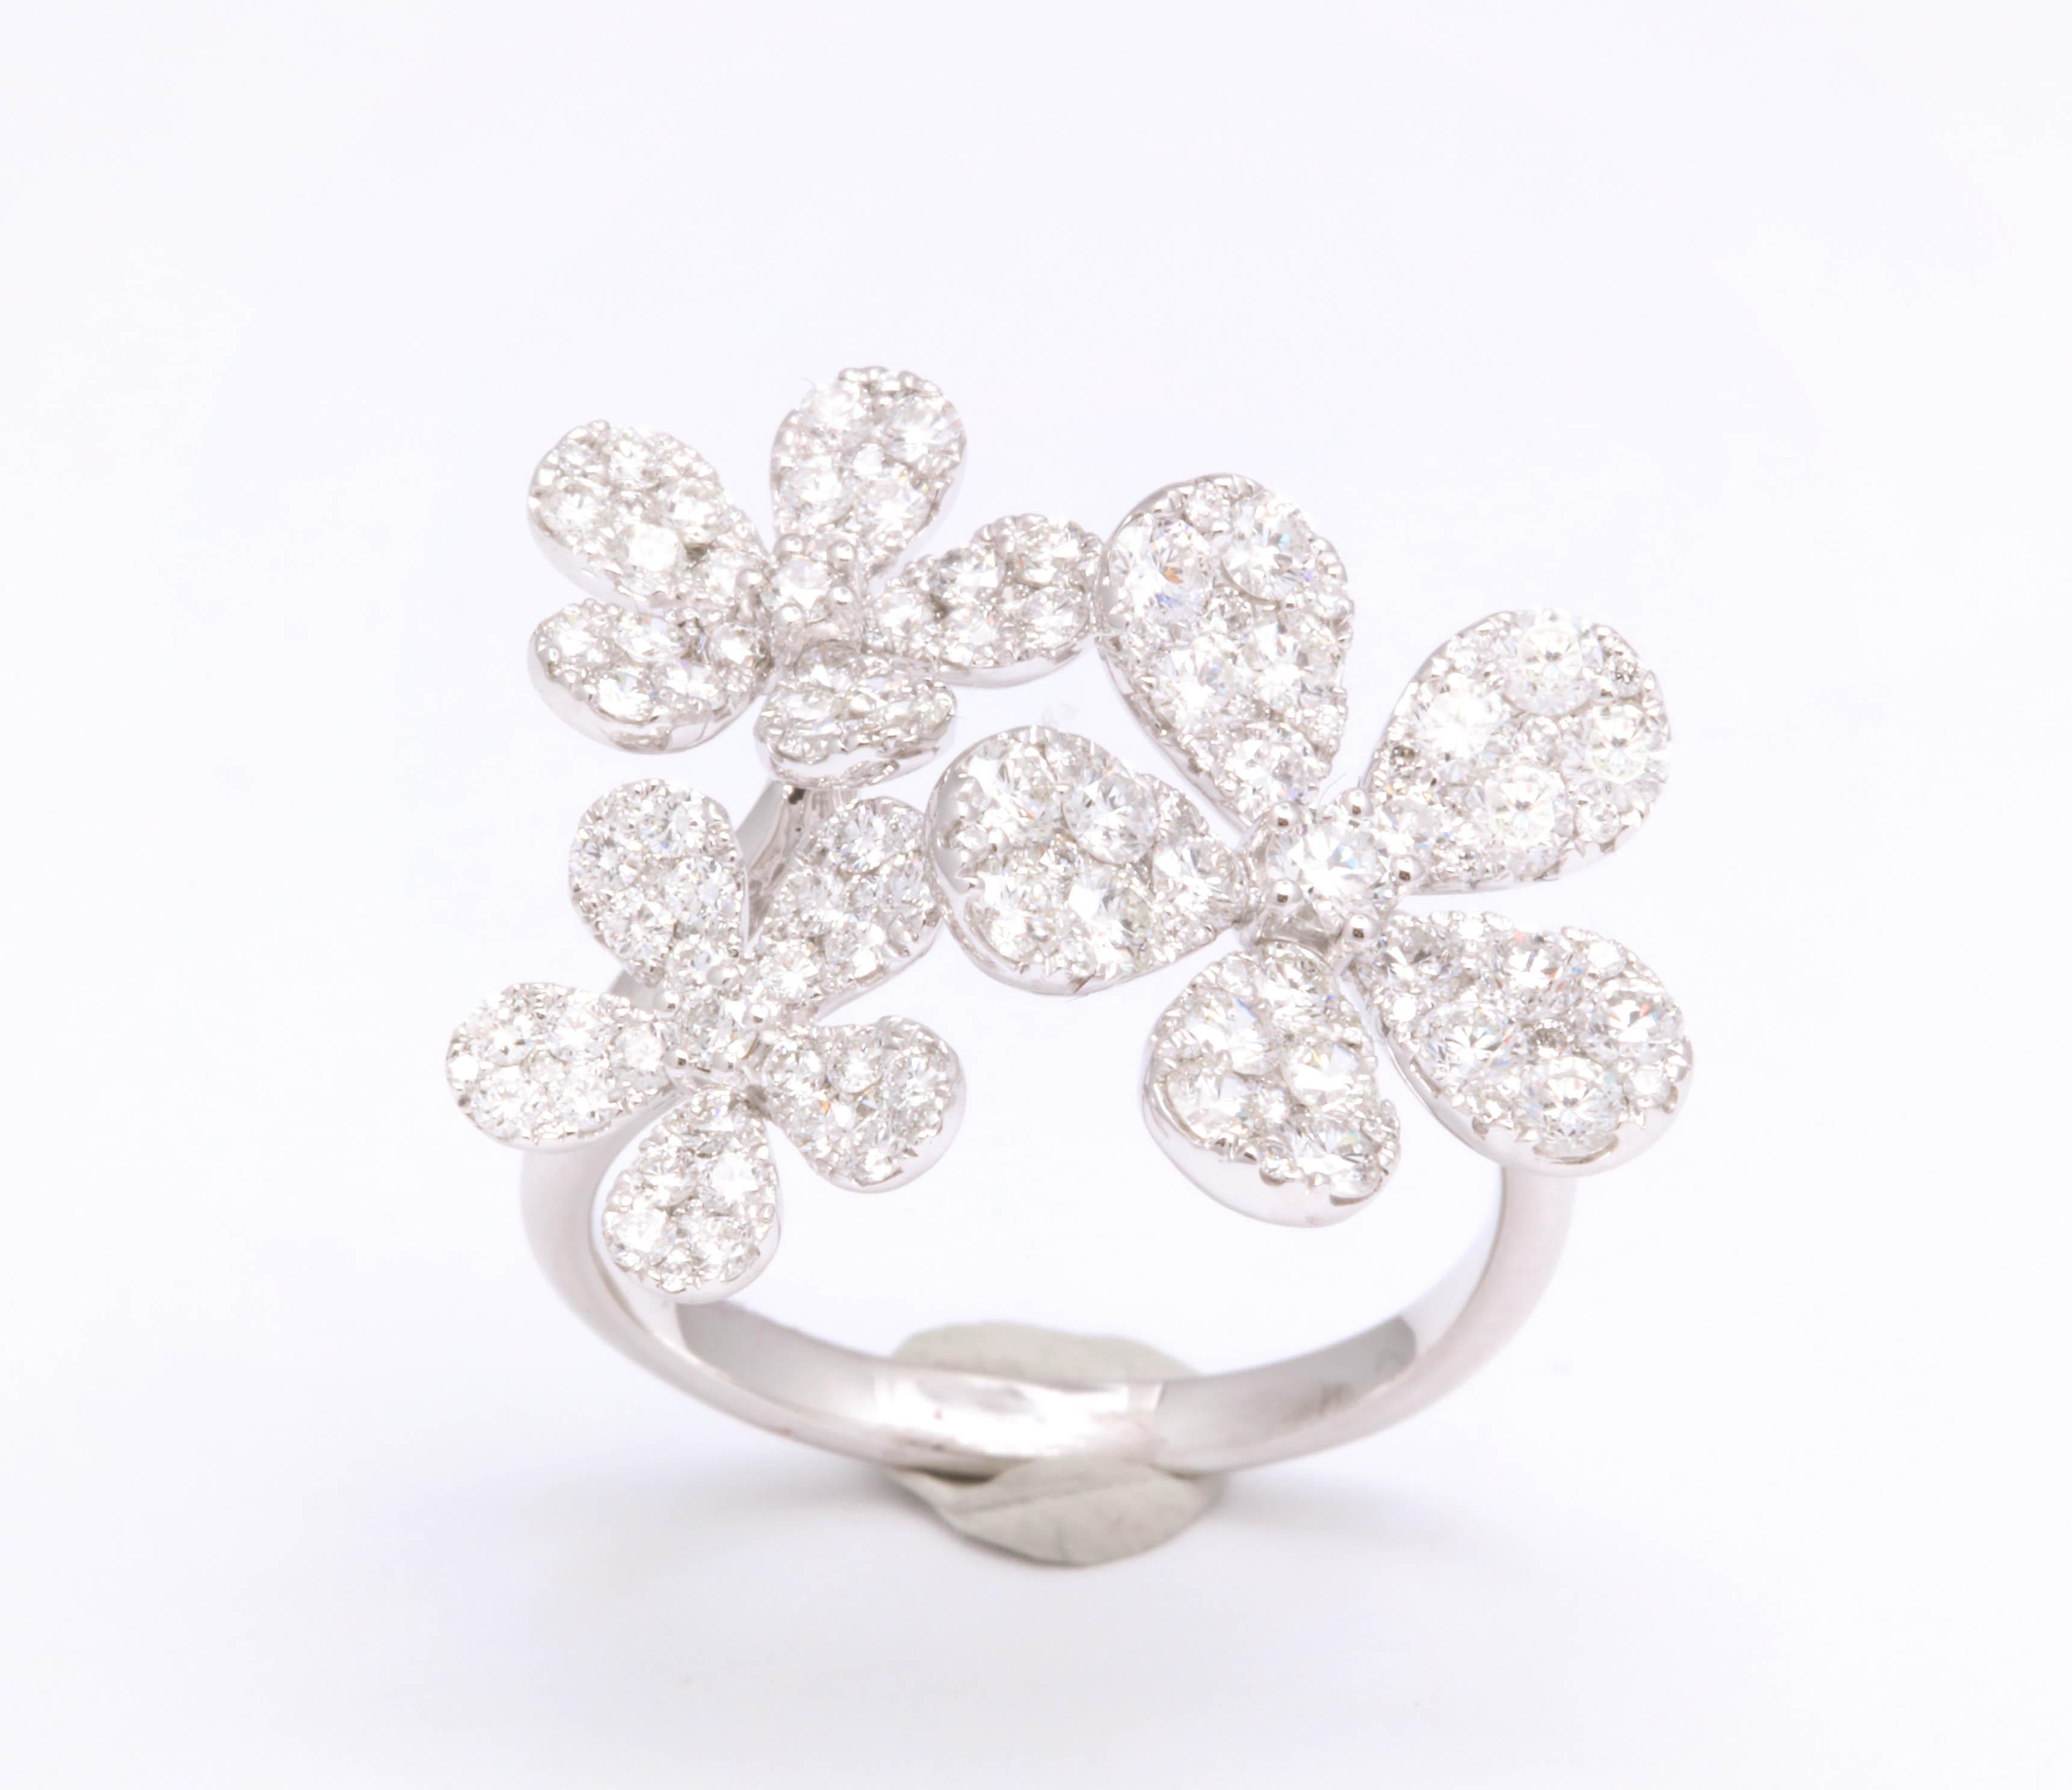 
Three 5 Petal Diamond Flower ring 

1.80 carats of white round brilliant cut diamonds set in 18k white gold.

The ring is currently a size 7,  but can be easily resized. 

A beautiful gift!!